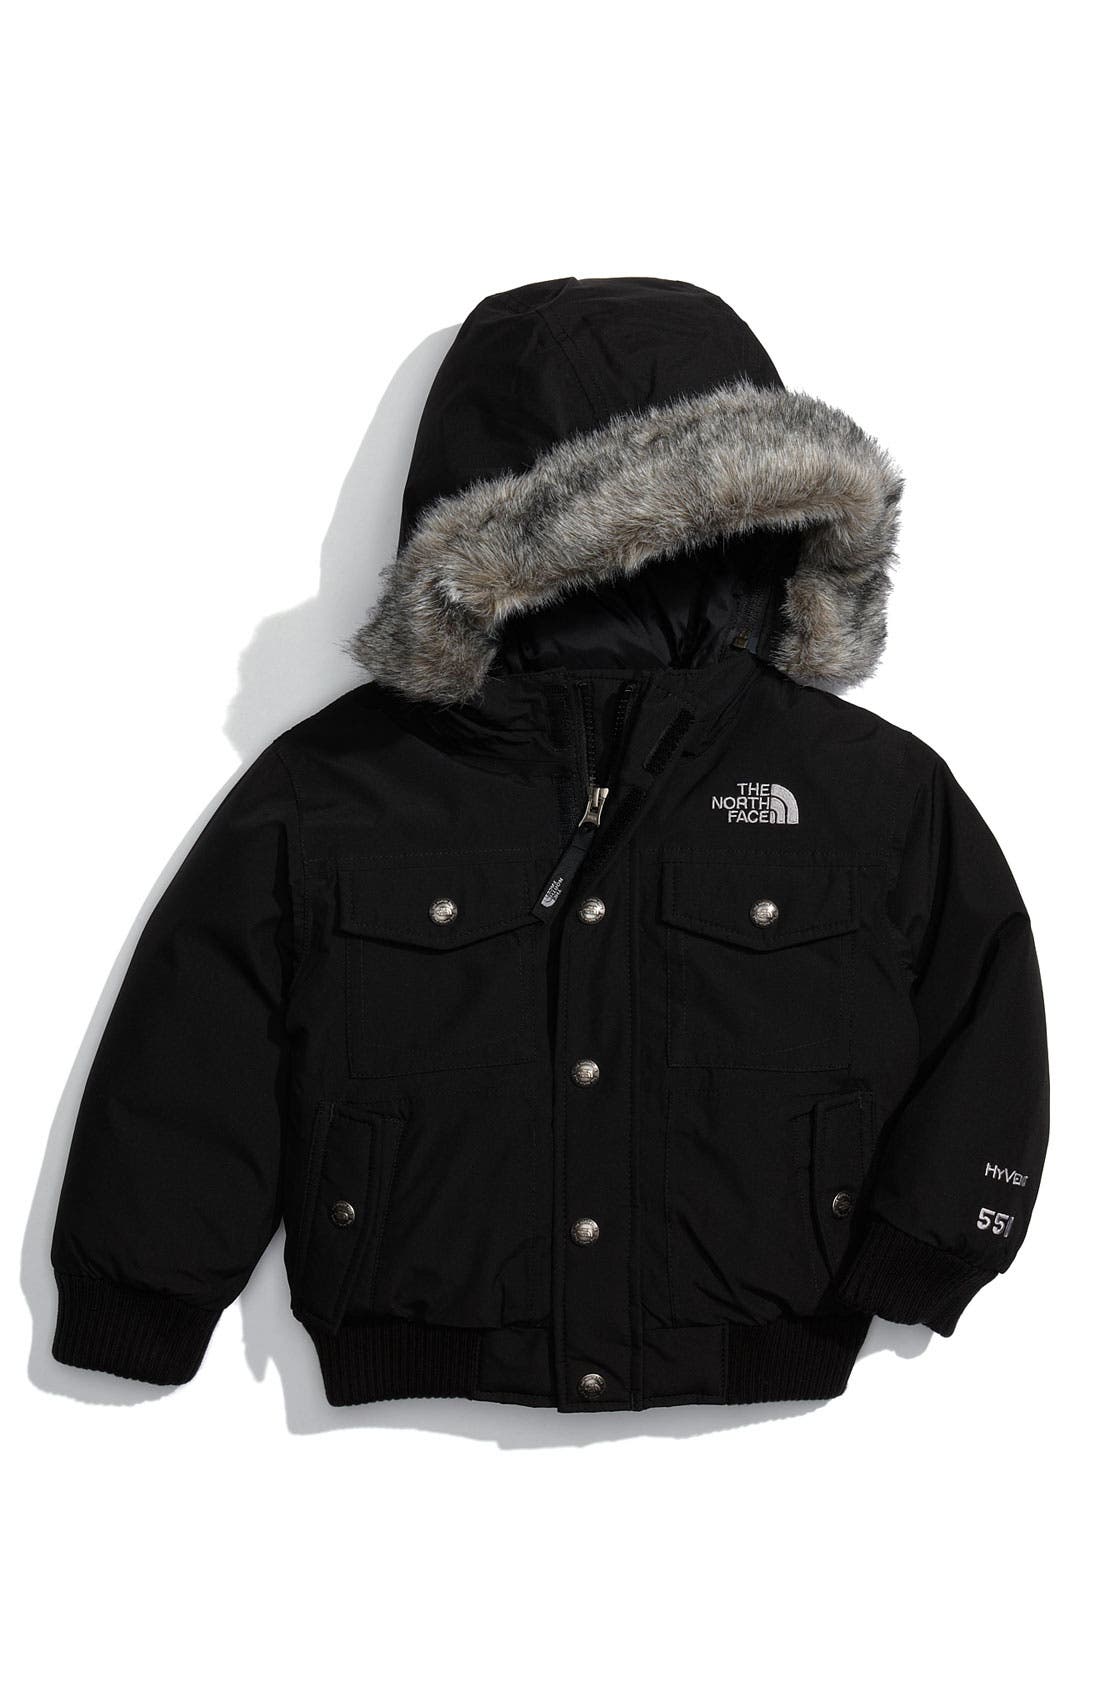 The North Face 'Gotham' Down Jacket 